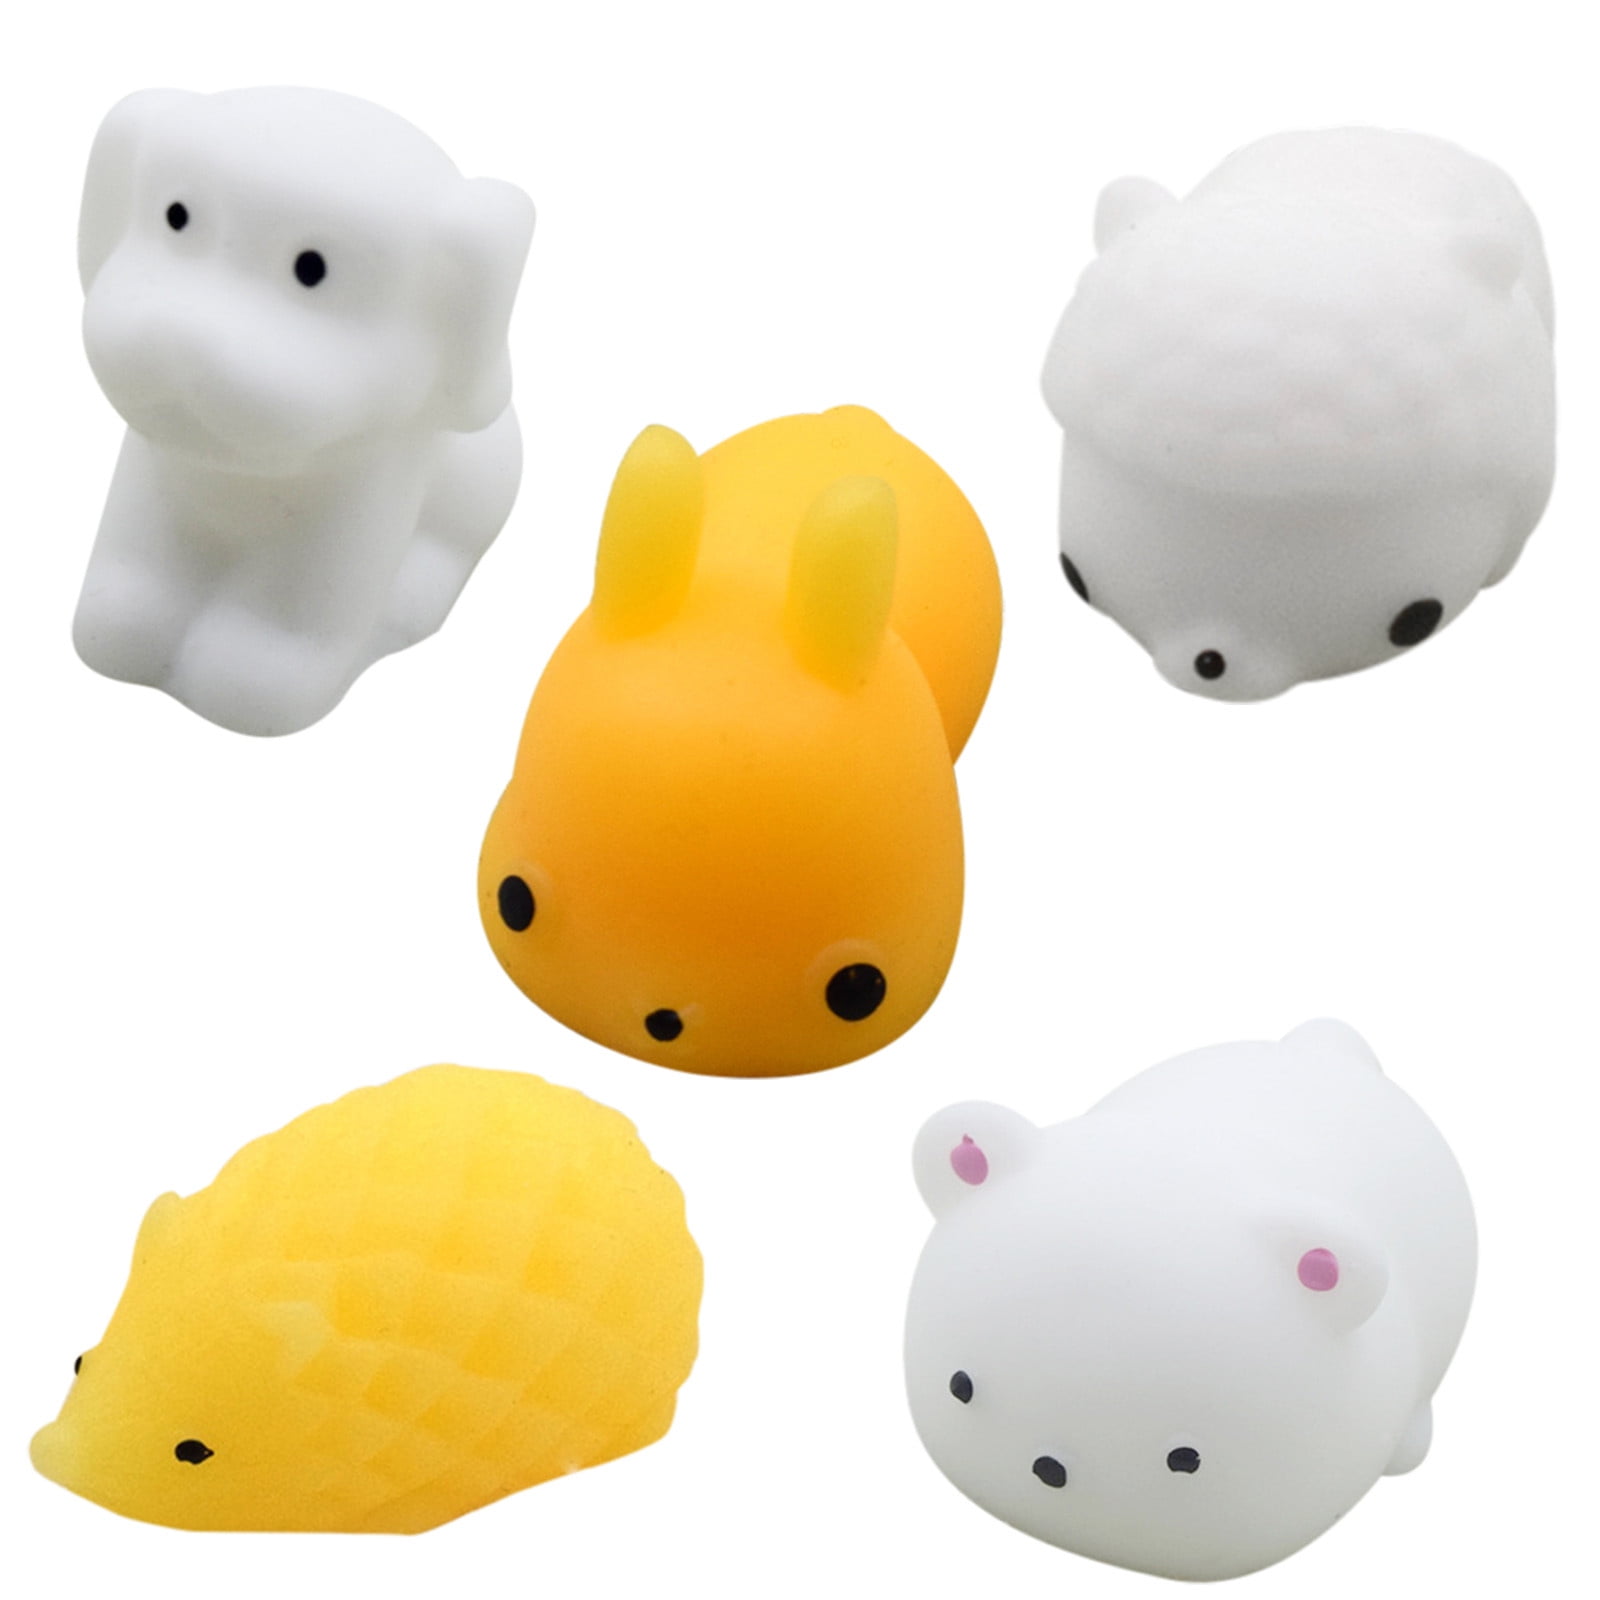 12Pcs Slow Rising Cute Squeeze Toys Ball Set PU Foam for Stress Relief Kids Toys 